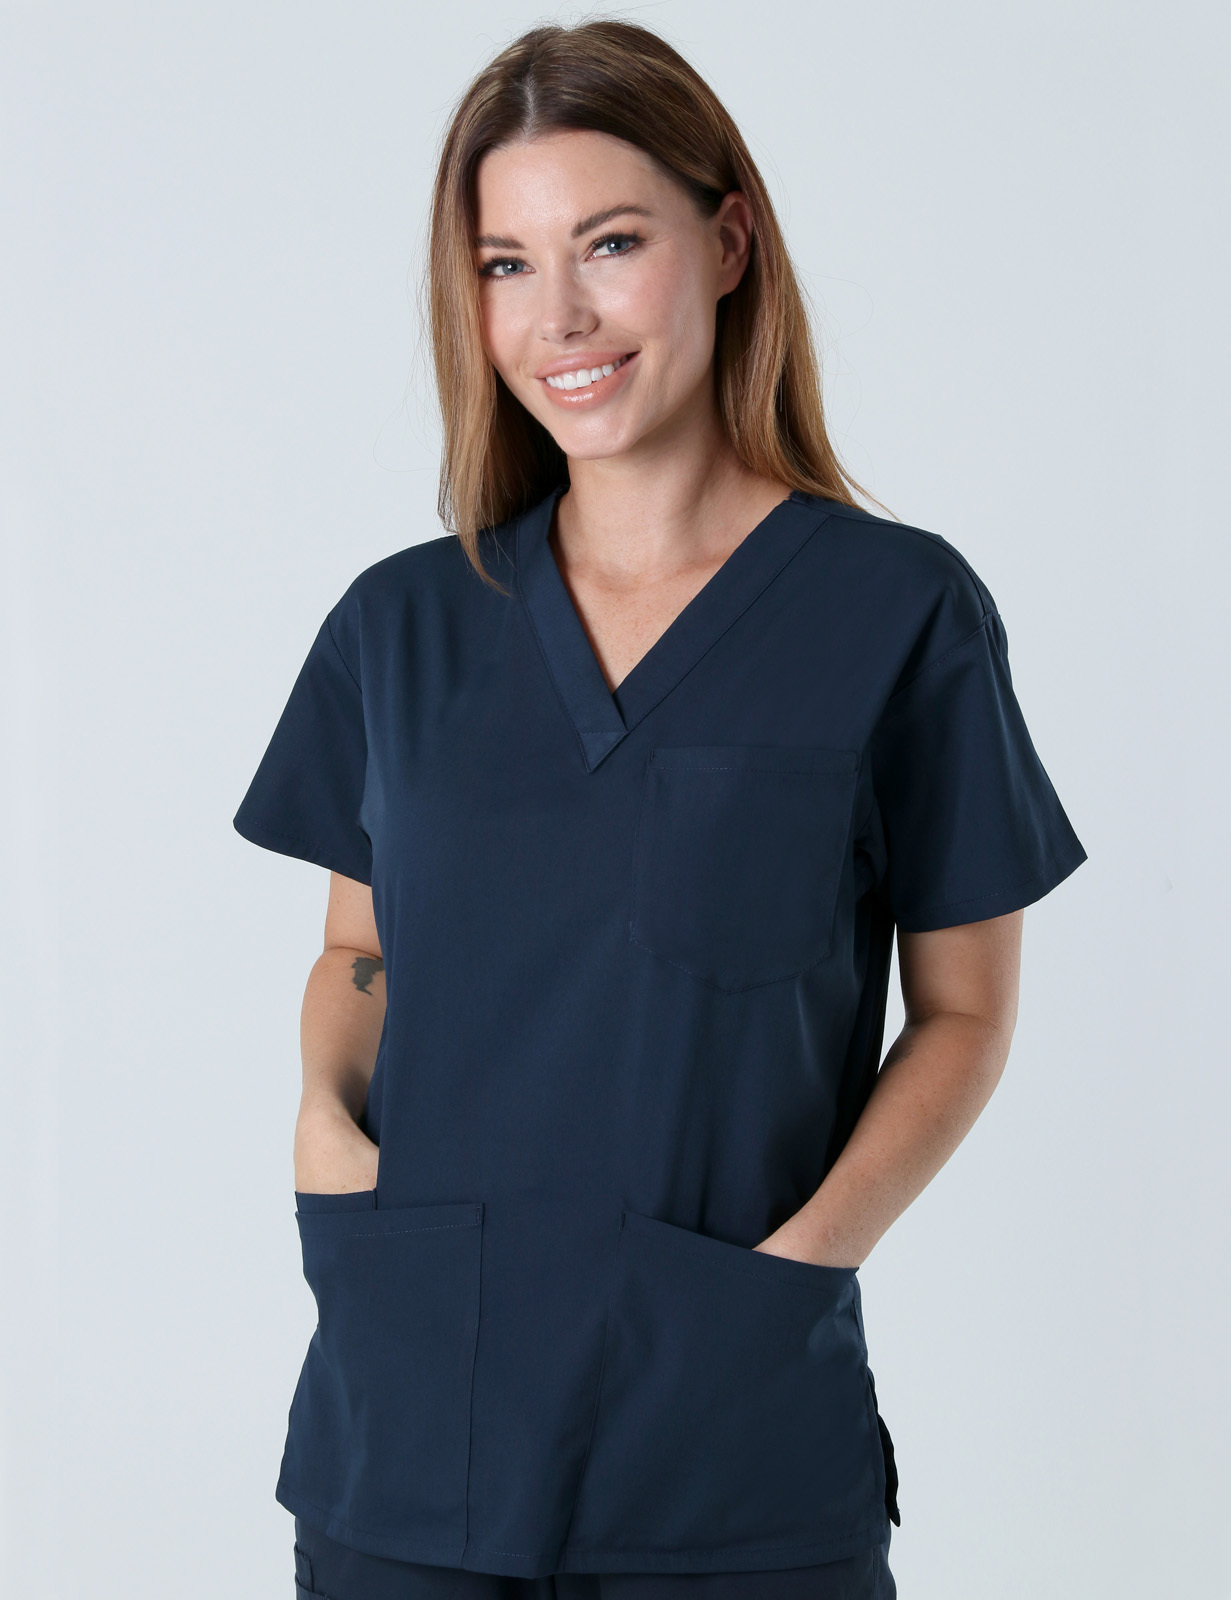 Gladstone Hospital - Medical Surgical (4 Pocket Scrub Top and Cargo Pants in Navy incl Logos)